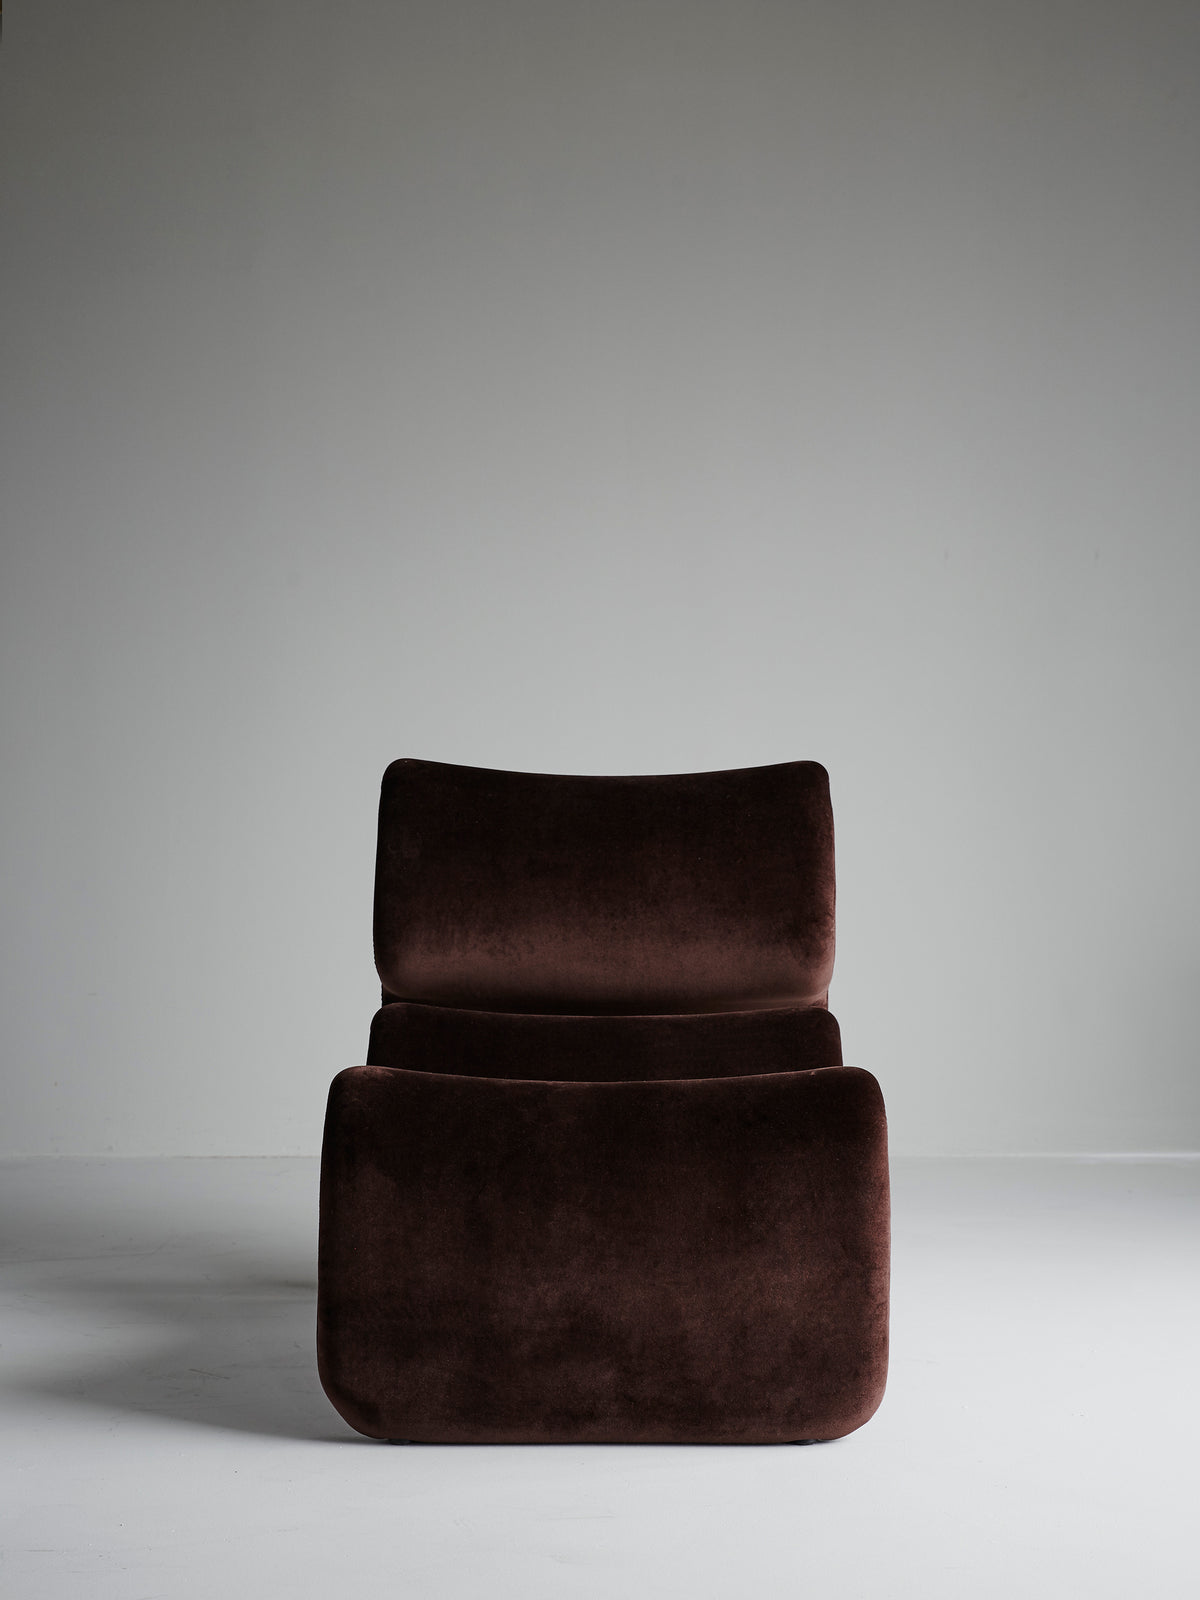 Etcetera Lounge Chair